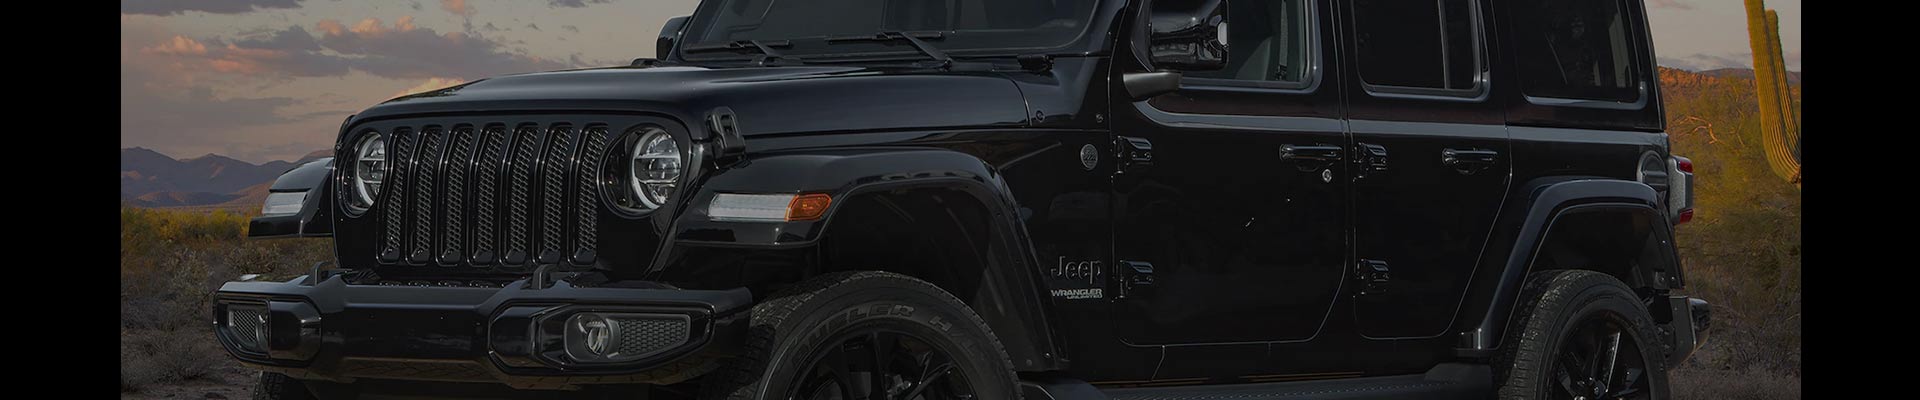 Shop Replacement and OEM 2008 Jeep Wrangler Parts with Discounted Price on the Net